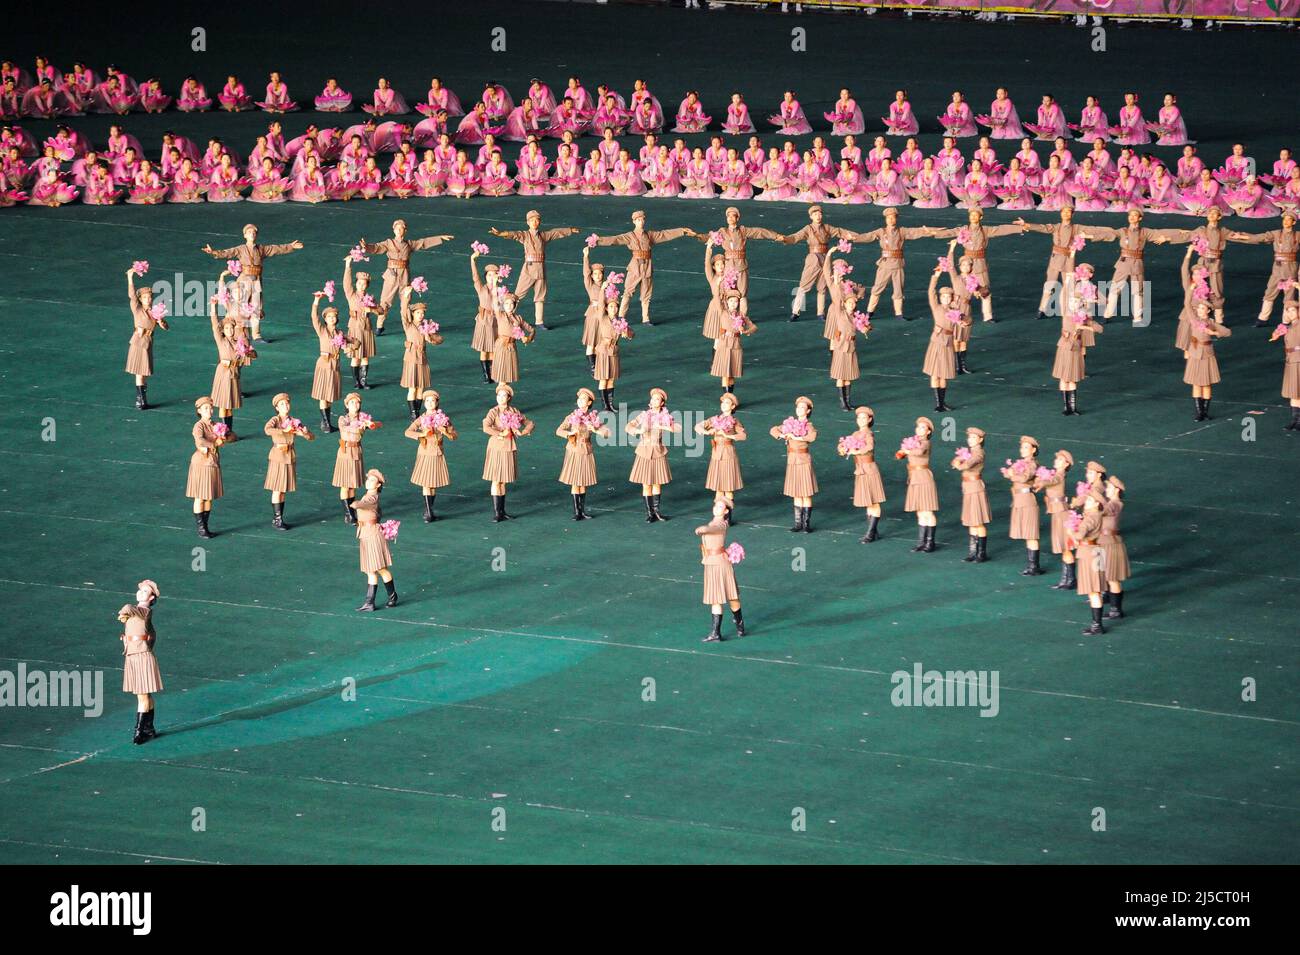 08.08.2012, Pjoengjang, North Korea, Asia - Mass choreography and artistic performance with dancers and acrobats at the First of May Stadium during the Arirang Festival and Mass Games in the North Korean capital. [automated translation] Stock Photo